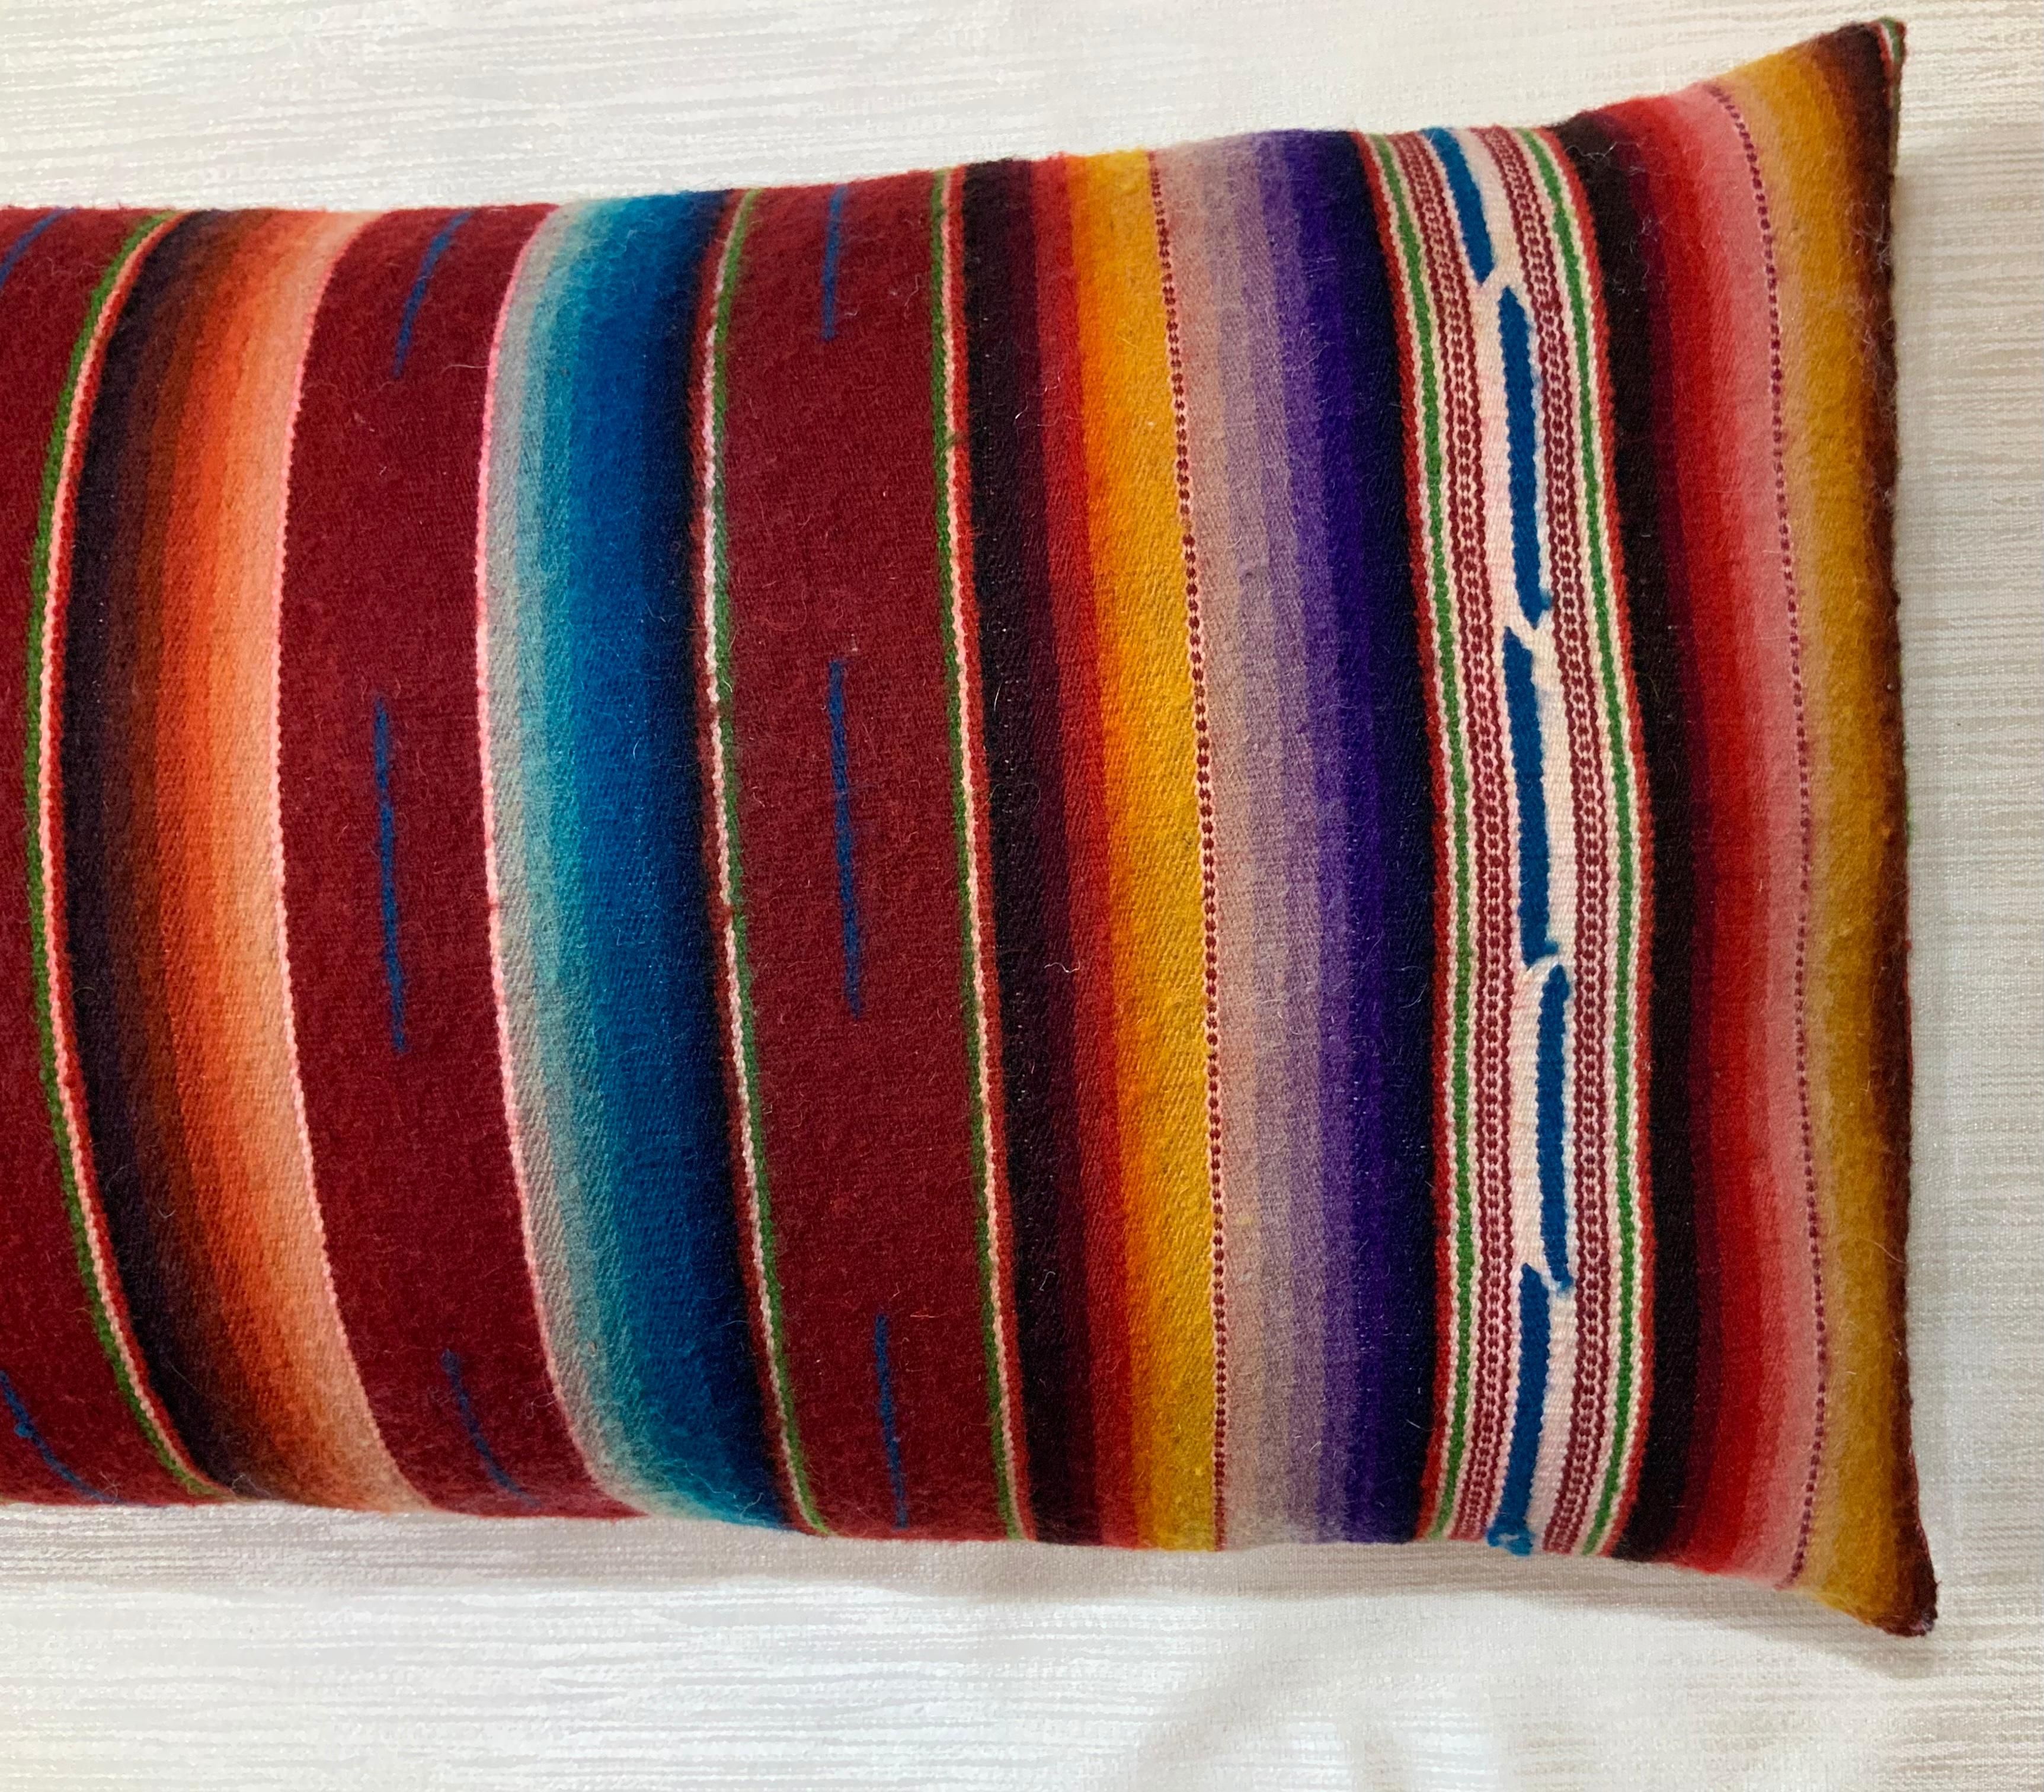 Beautiful pair of pillows made of finely handwoven multi-color vintage Saltillo Mexican blanket.
Originally this price used as wall tapestry and we decided to make pillows from it .the pillows are made with the woven textile back and front, with